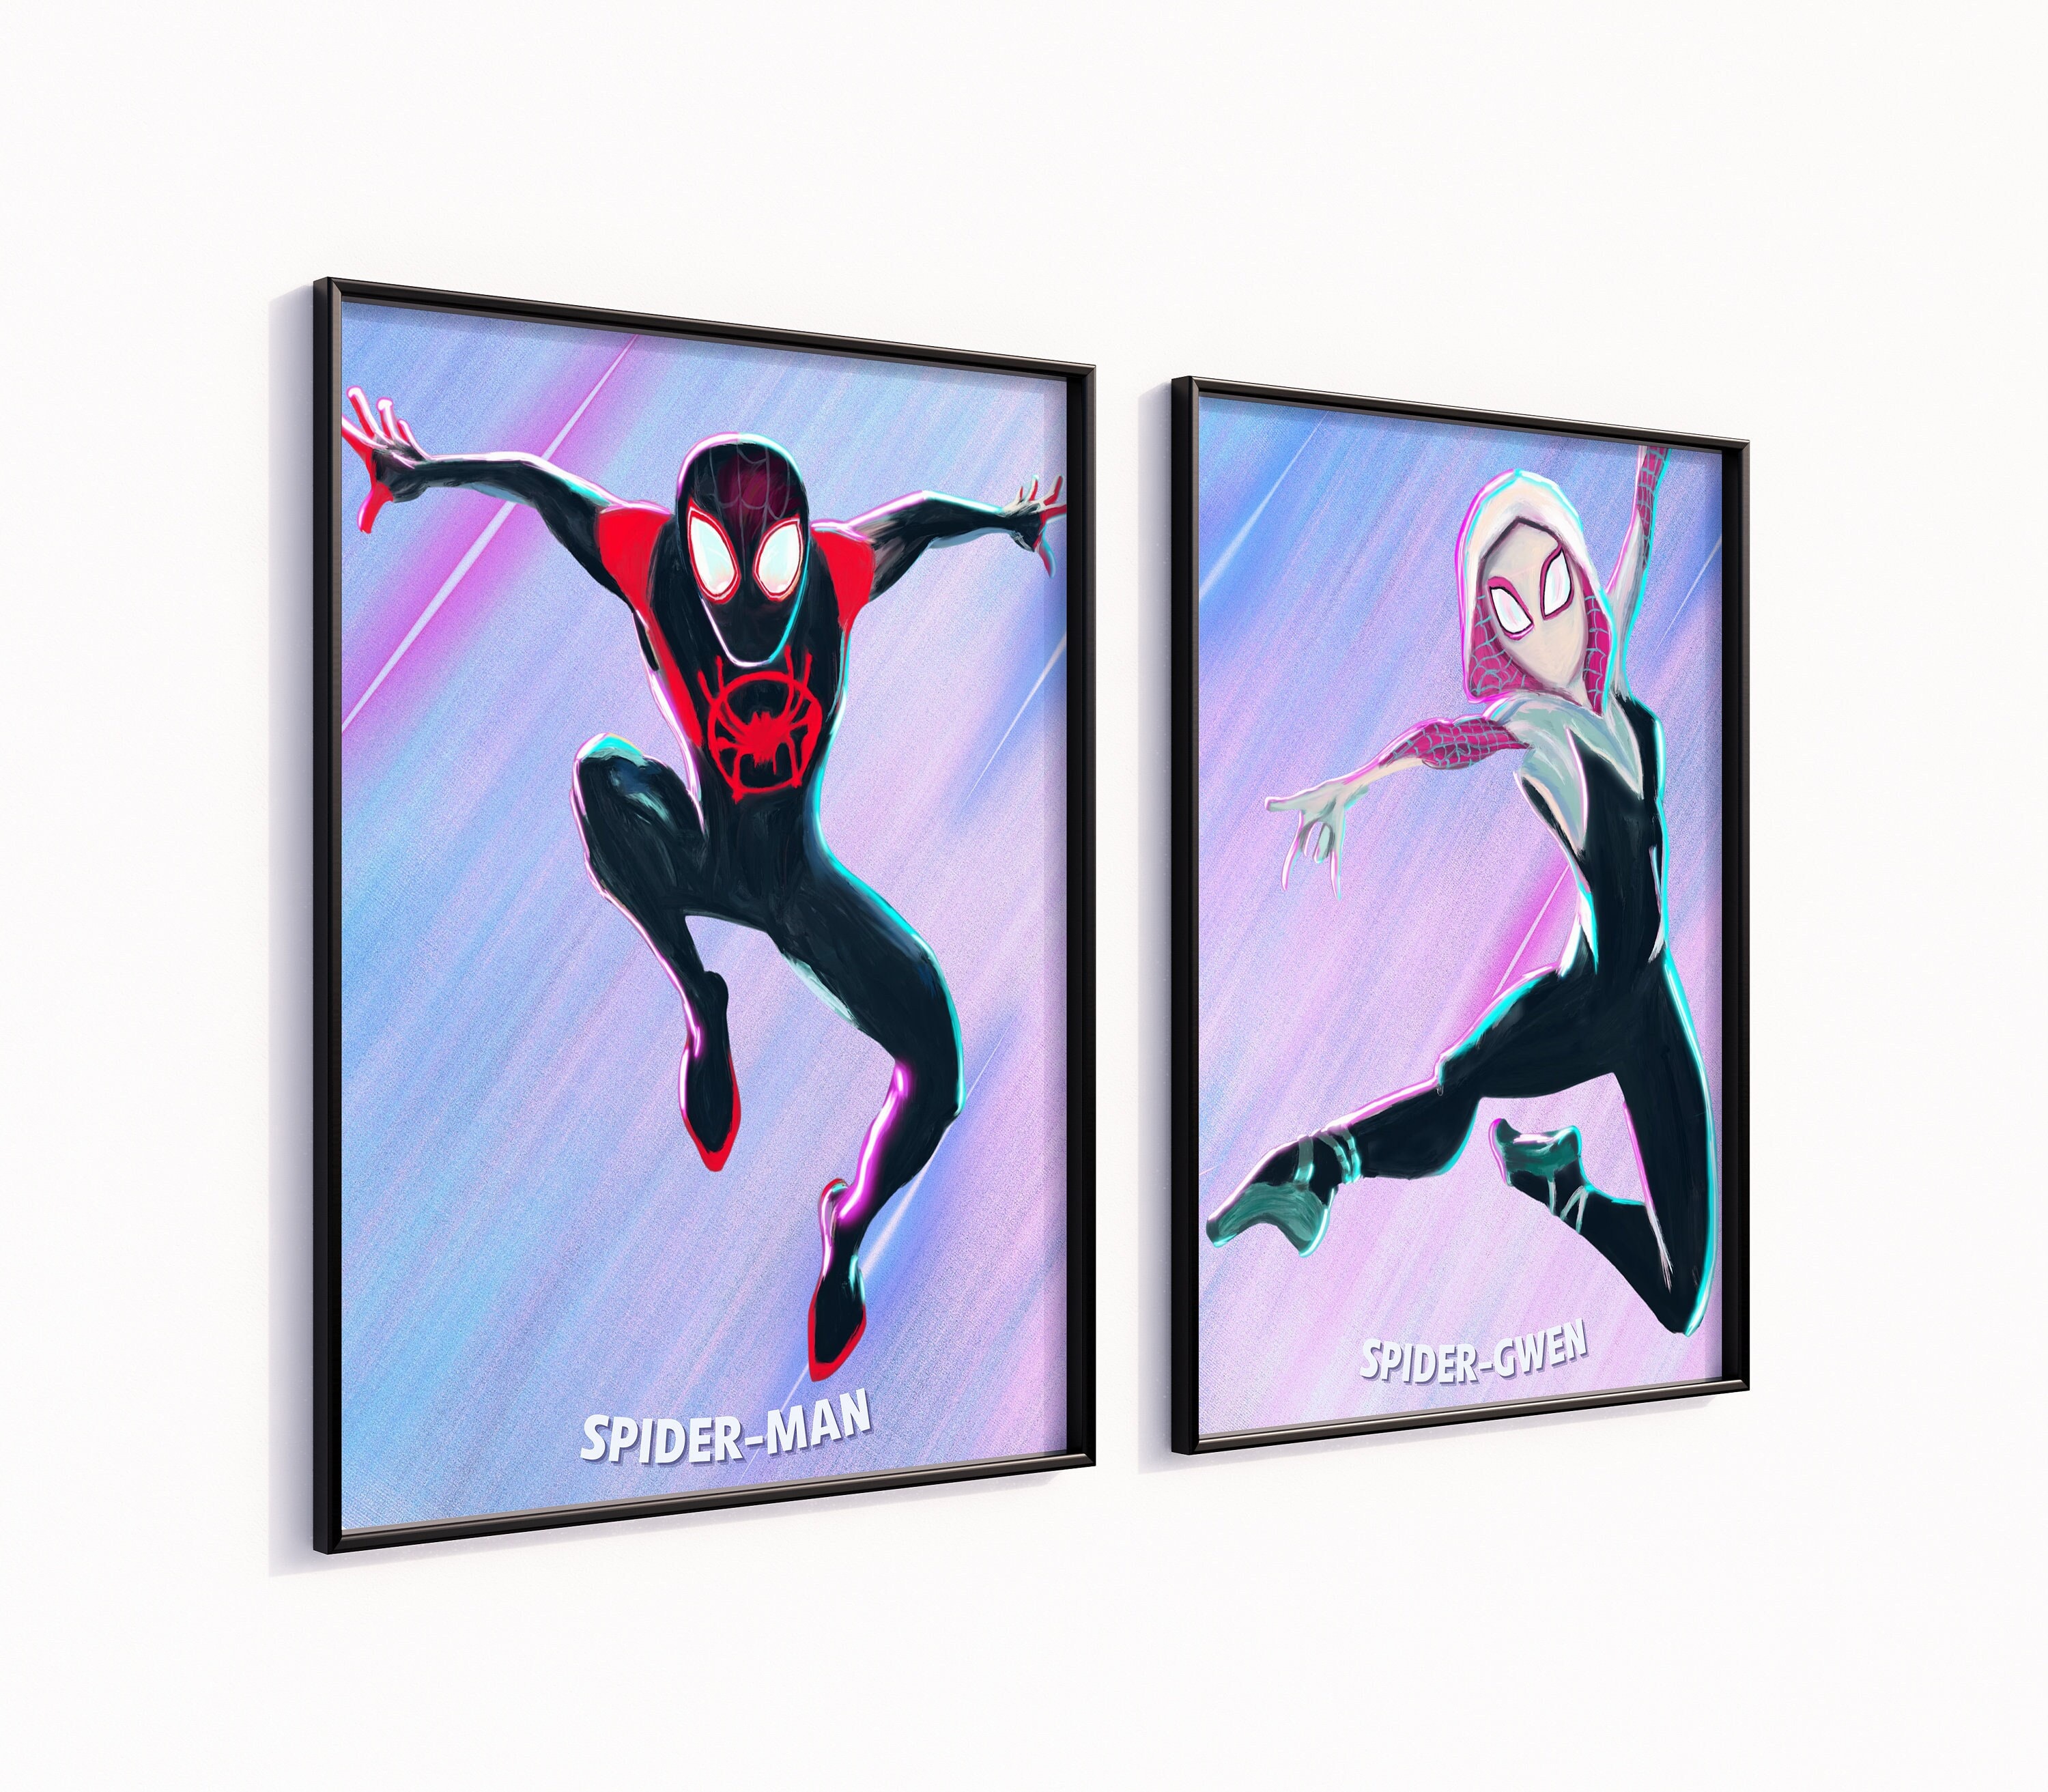  The Amazing Spider Man 2 Video Game Miles Movie Poster  Vintage Look Tin Metal Sign Wall Decoration 8x12 Inches: Posters & Prints